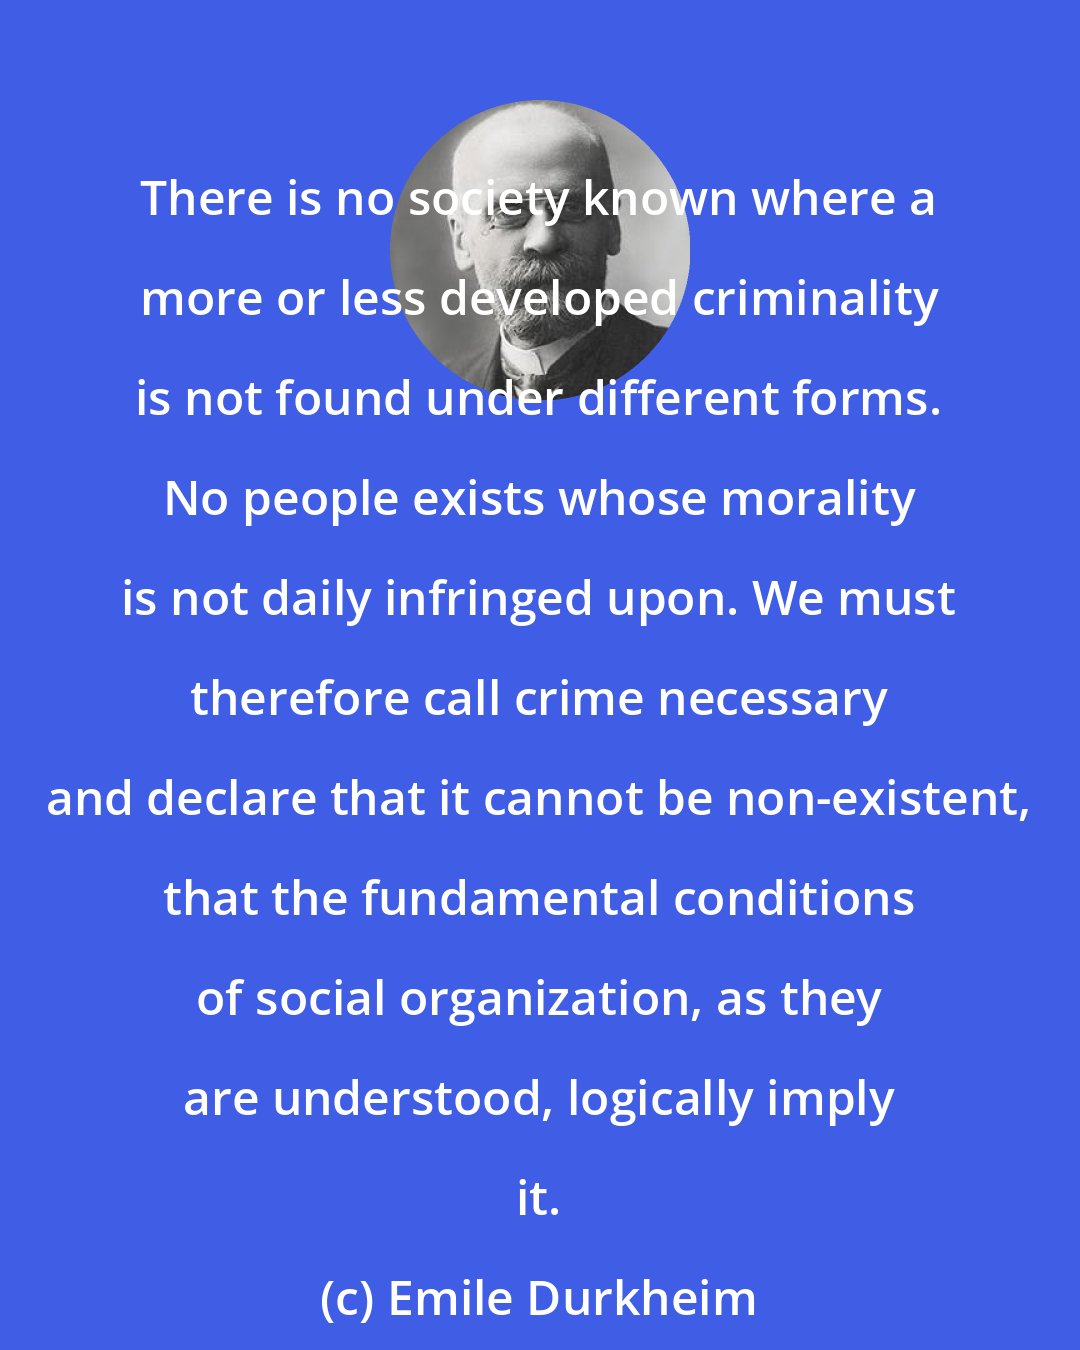 Emile Durkheim: There is no society known where a more or less developed criminality is not found under different forms. No people exists whose morality is not daily infringed upon. We must therefore call crime necessary and declare that it cannot be non-existent, that the fundamental conditions of social organization, as they are understood, logically imply it.